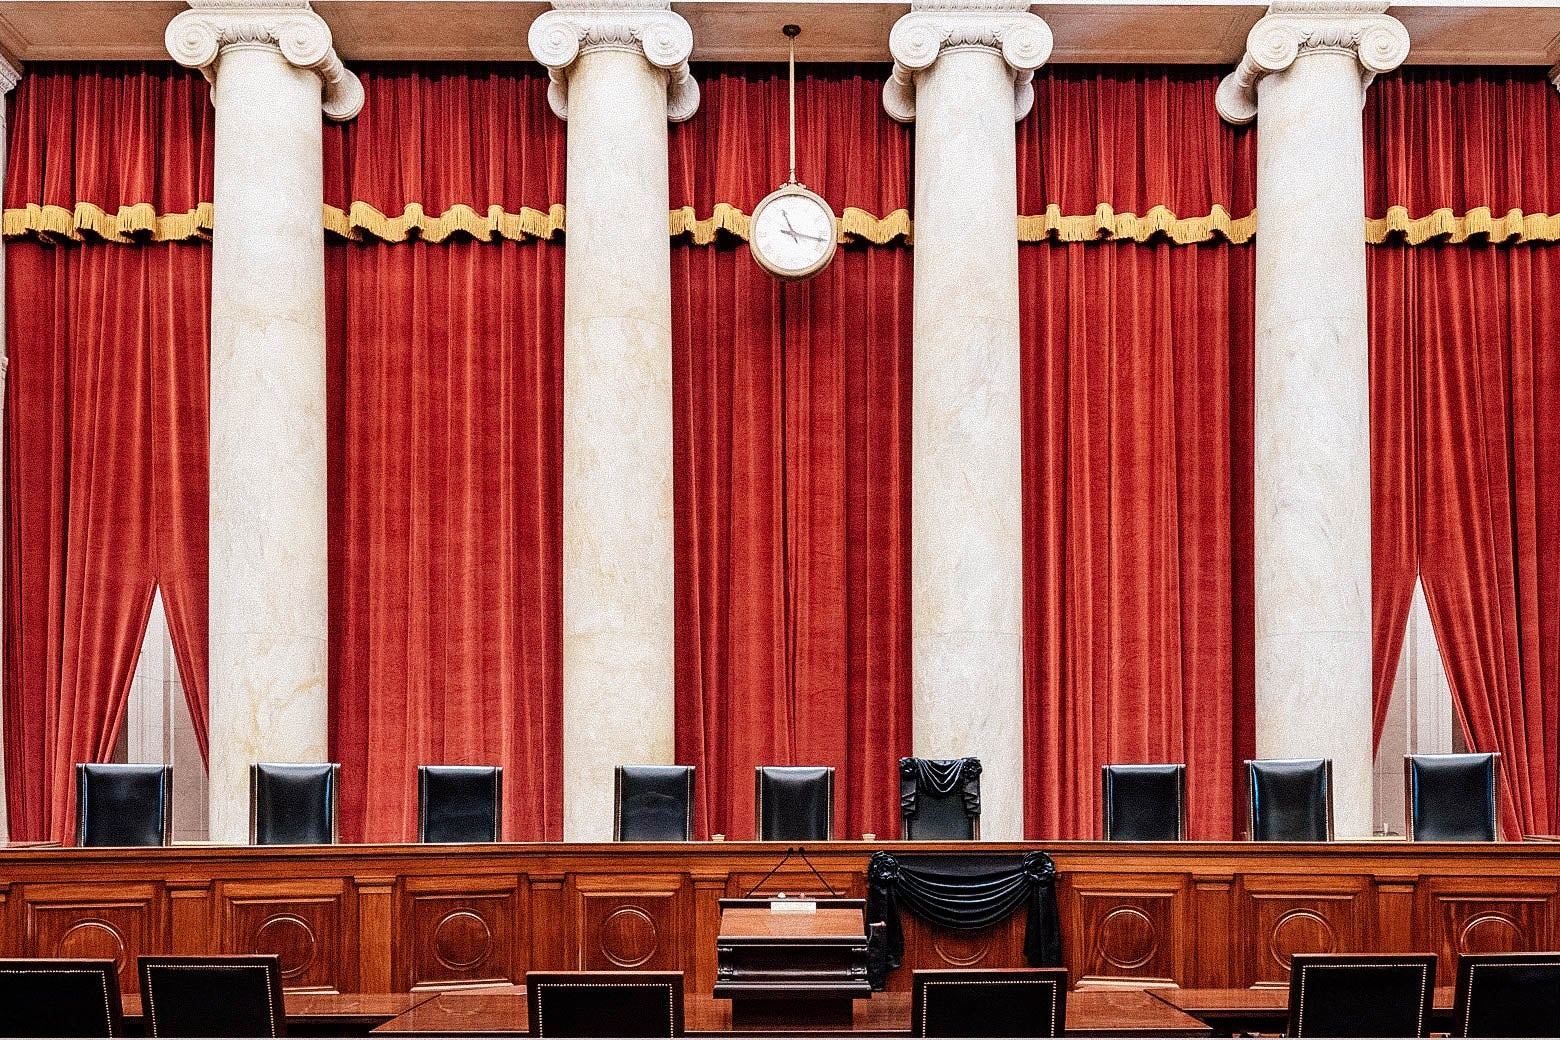 The inside of the Supreme Court.